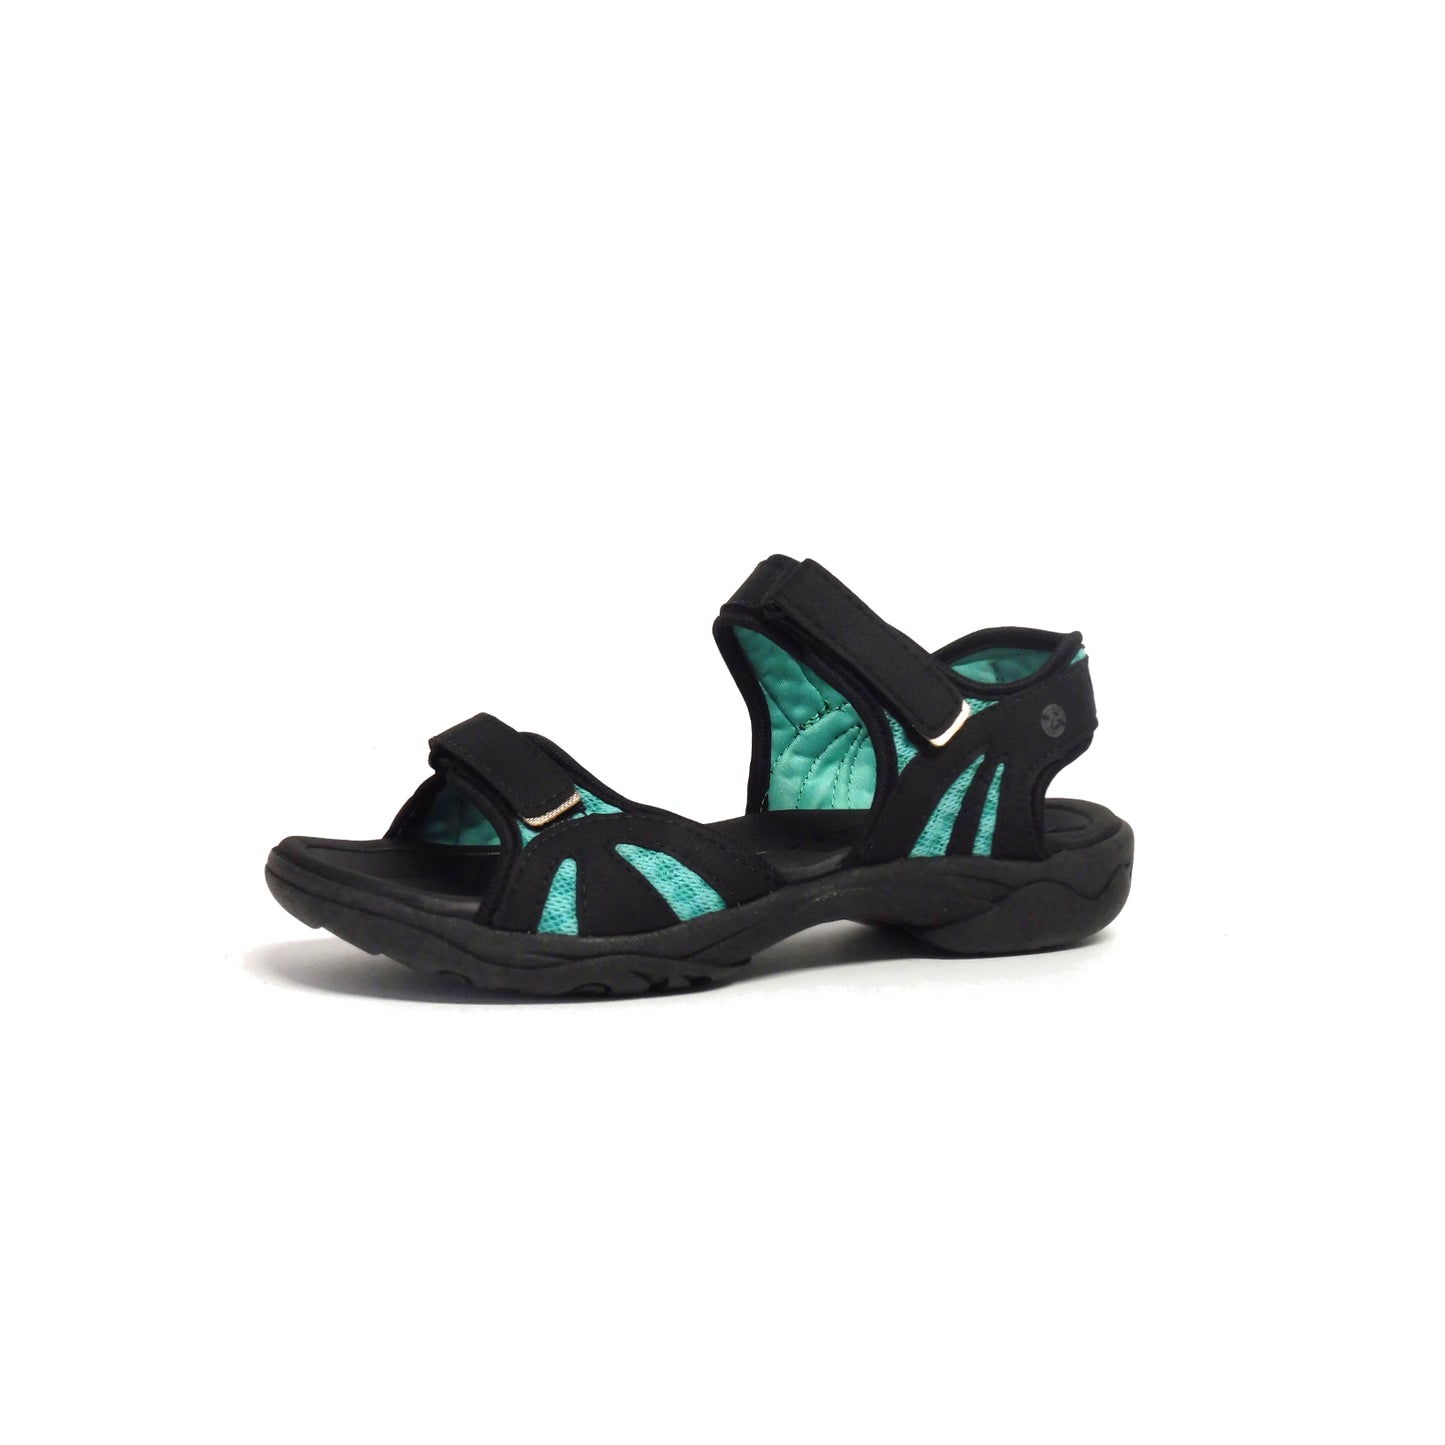 New Face 01 Black/Turquoise (size 37) ONLINE ONLY